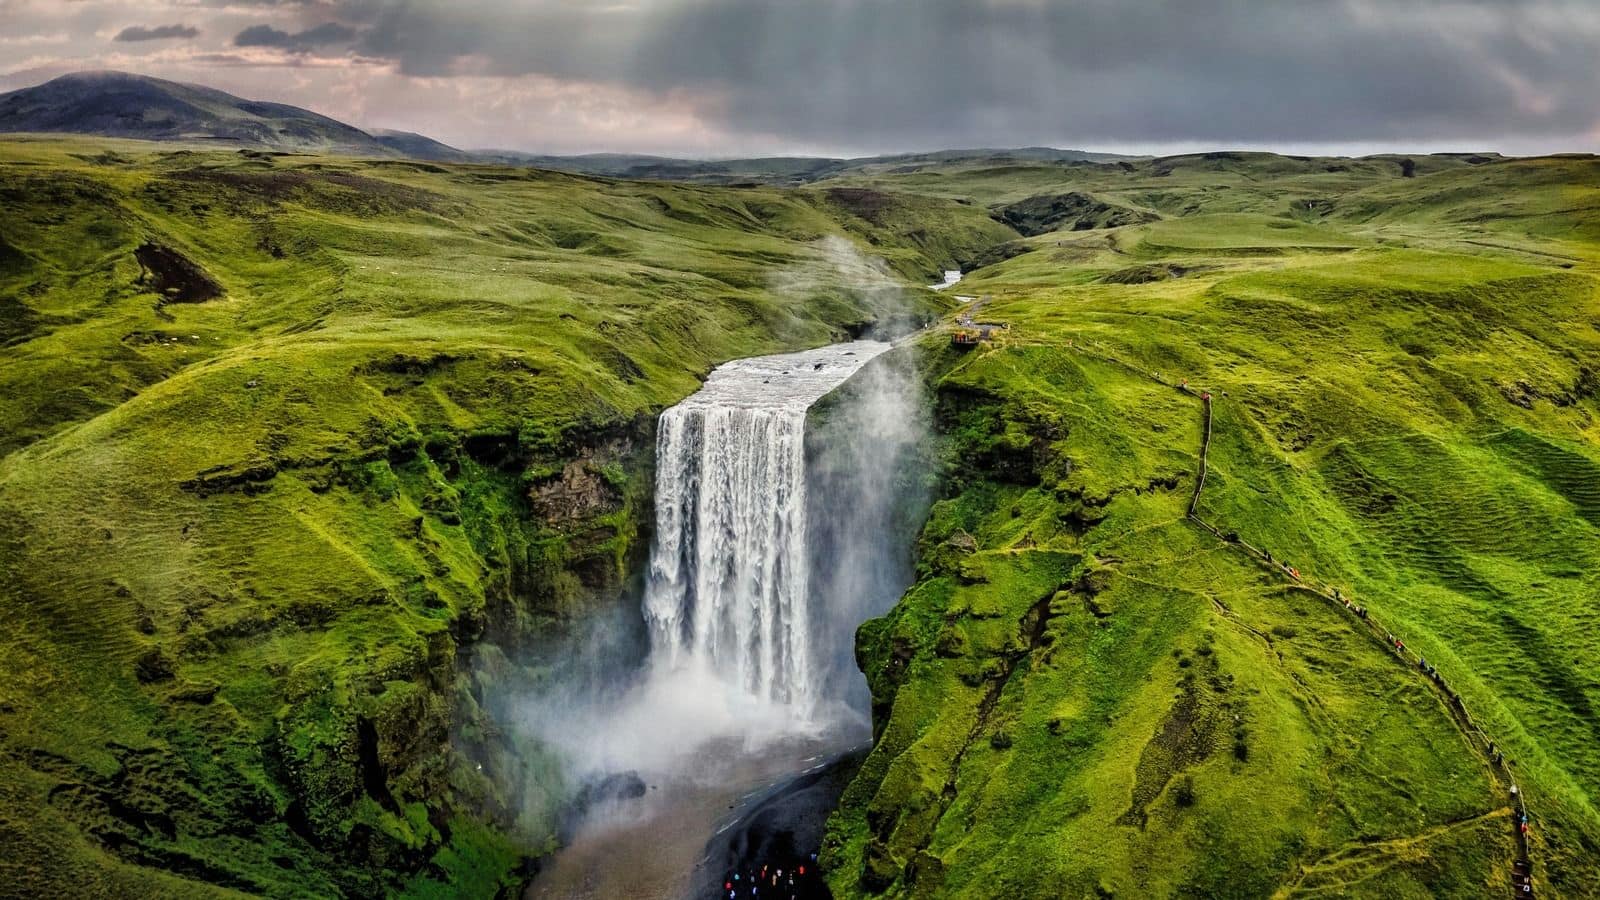 Add Iceland's majestic waterfalls to your itinerary